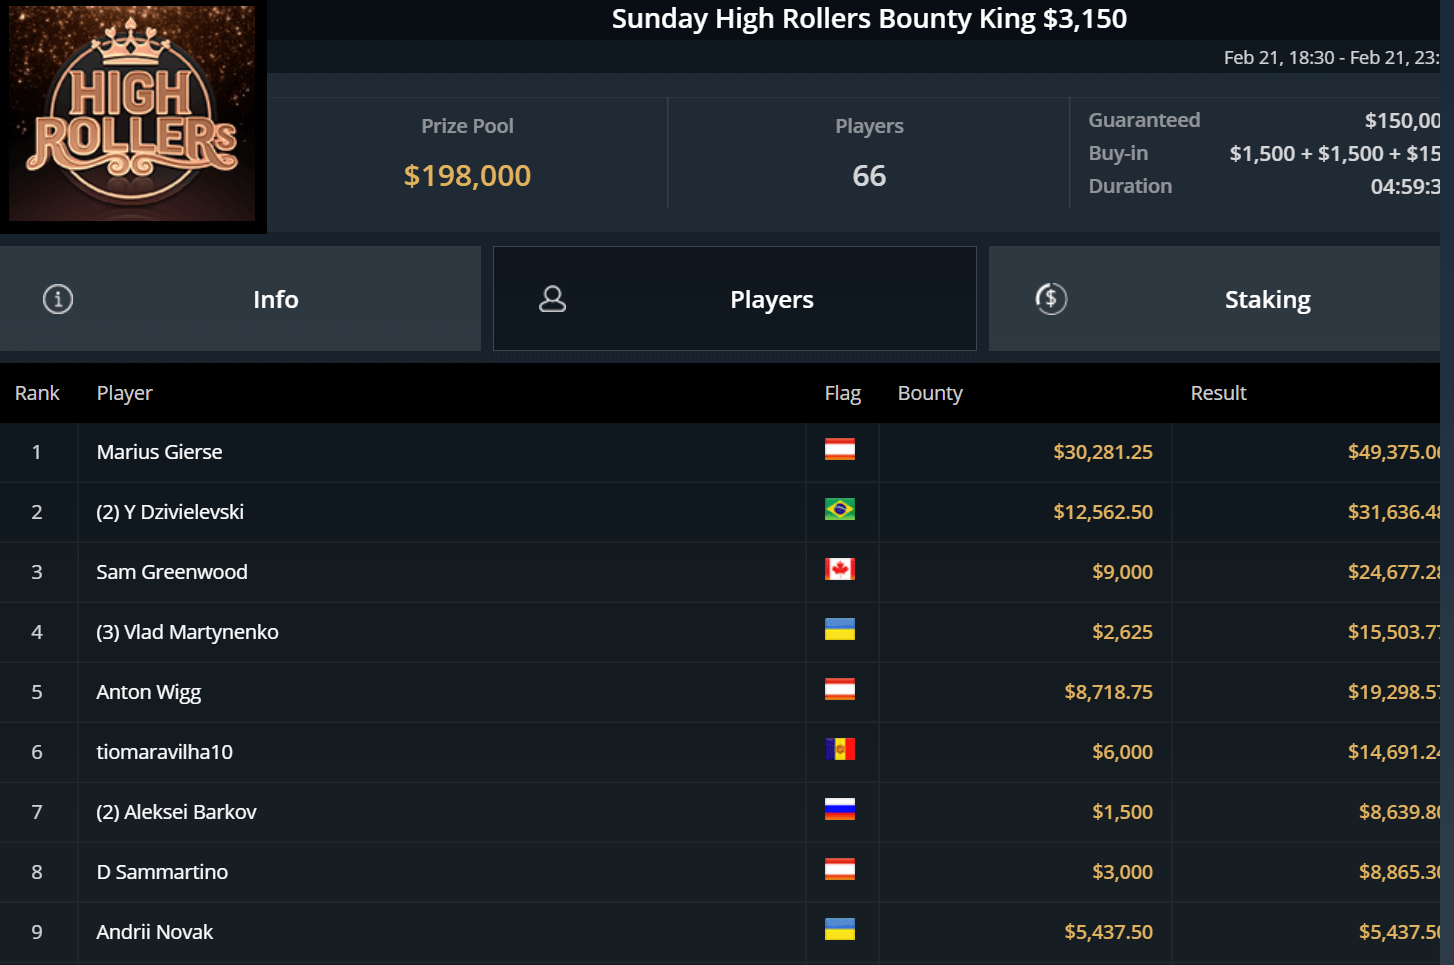 Sunday-High-Rollers-Bounty-King-3